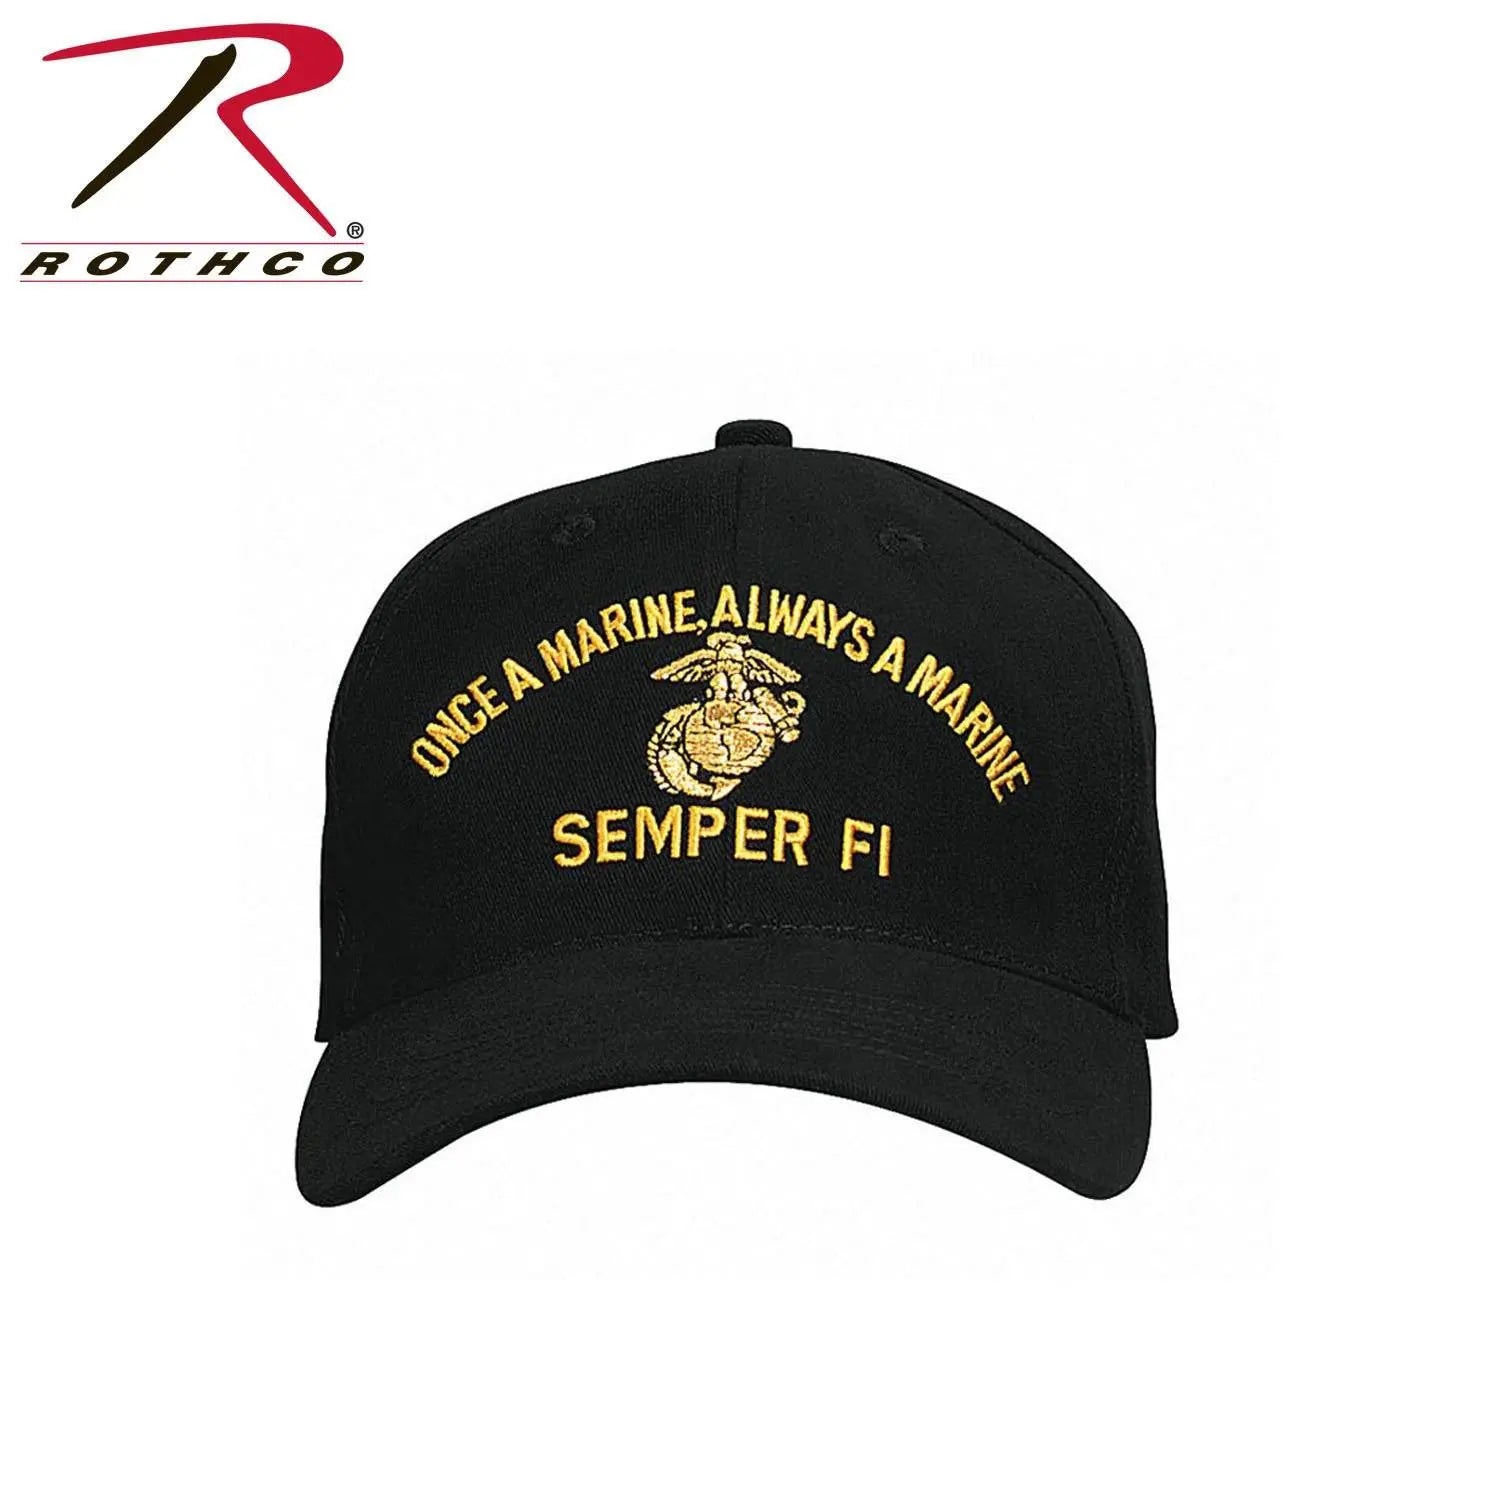 Once A Marine Always A Marine Semper Fi Gold & Black Low Profile Cap - Marine Corps Direct